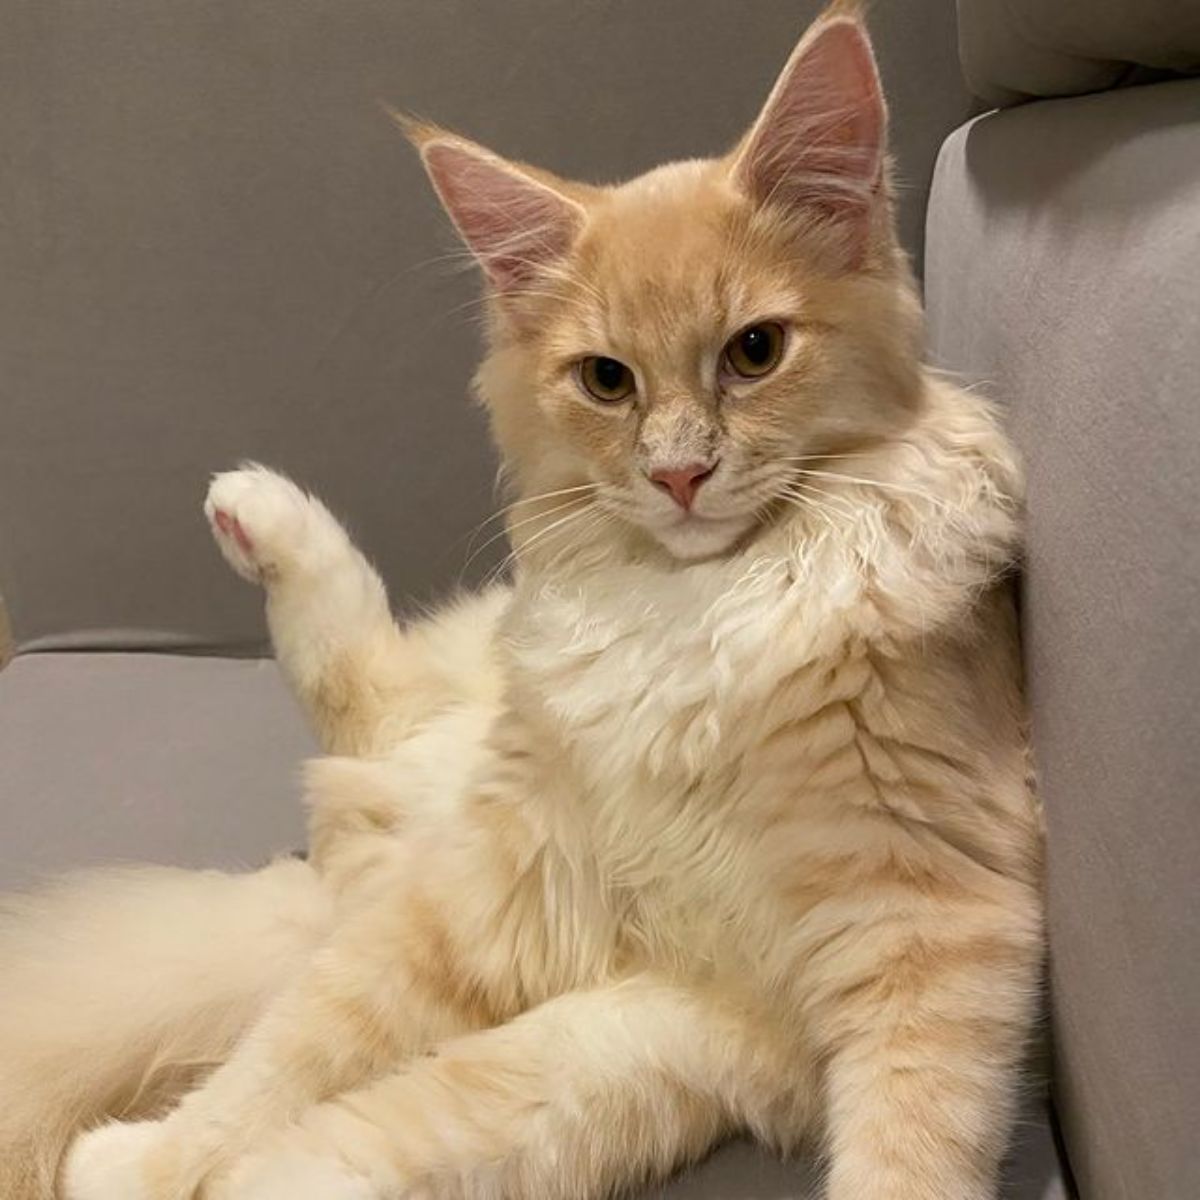 A fluffy golden maine coon sitting on a sofa.